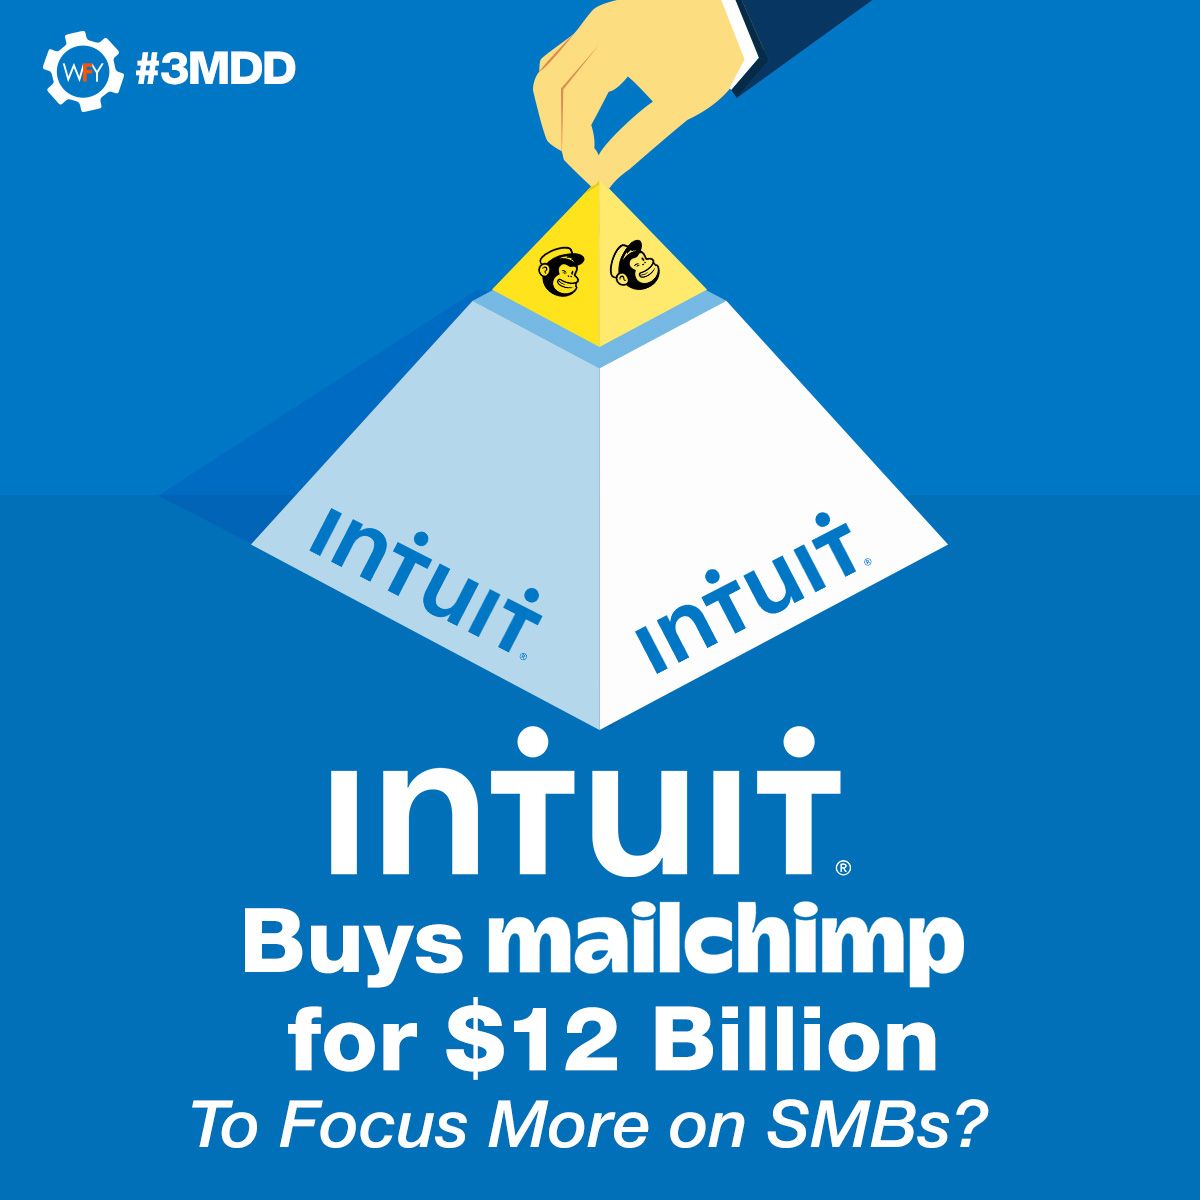 Intuit Buys Mailchimp for $12 Billion to Focus More on SMBs?